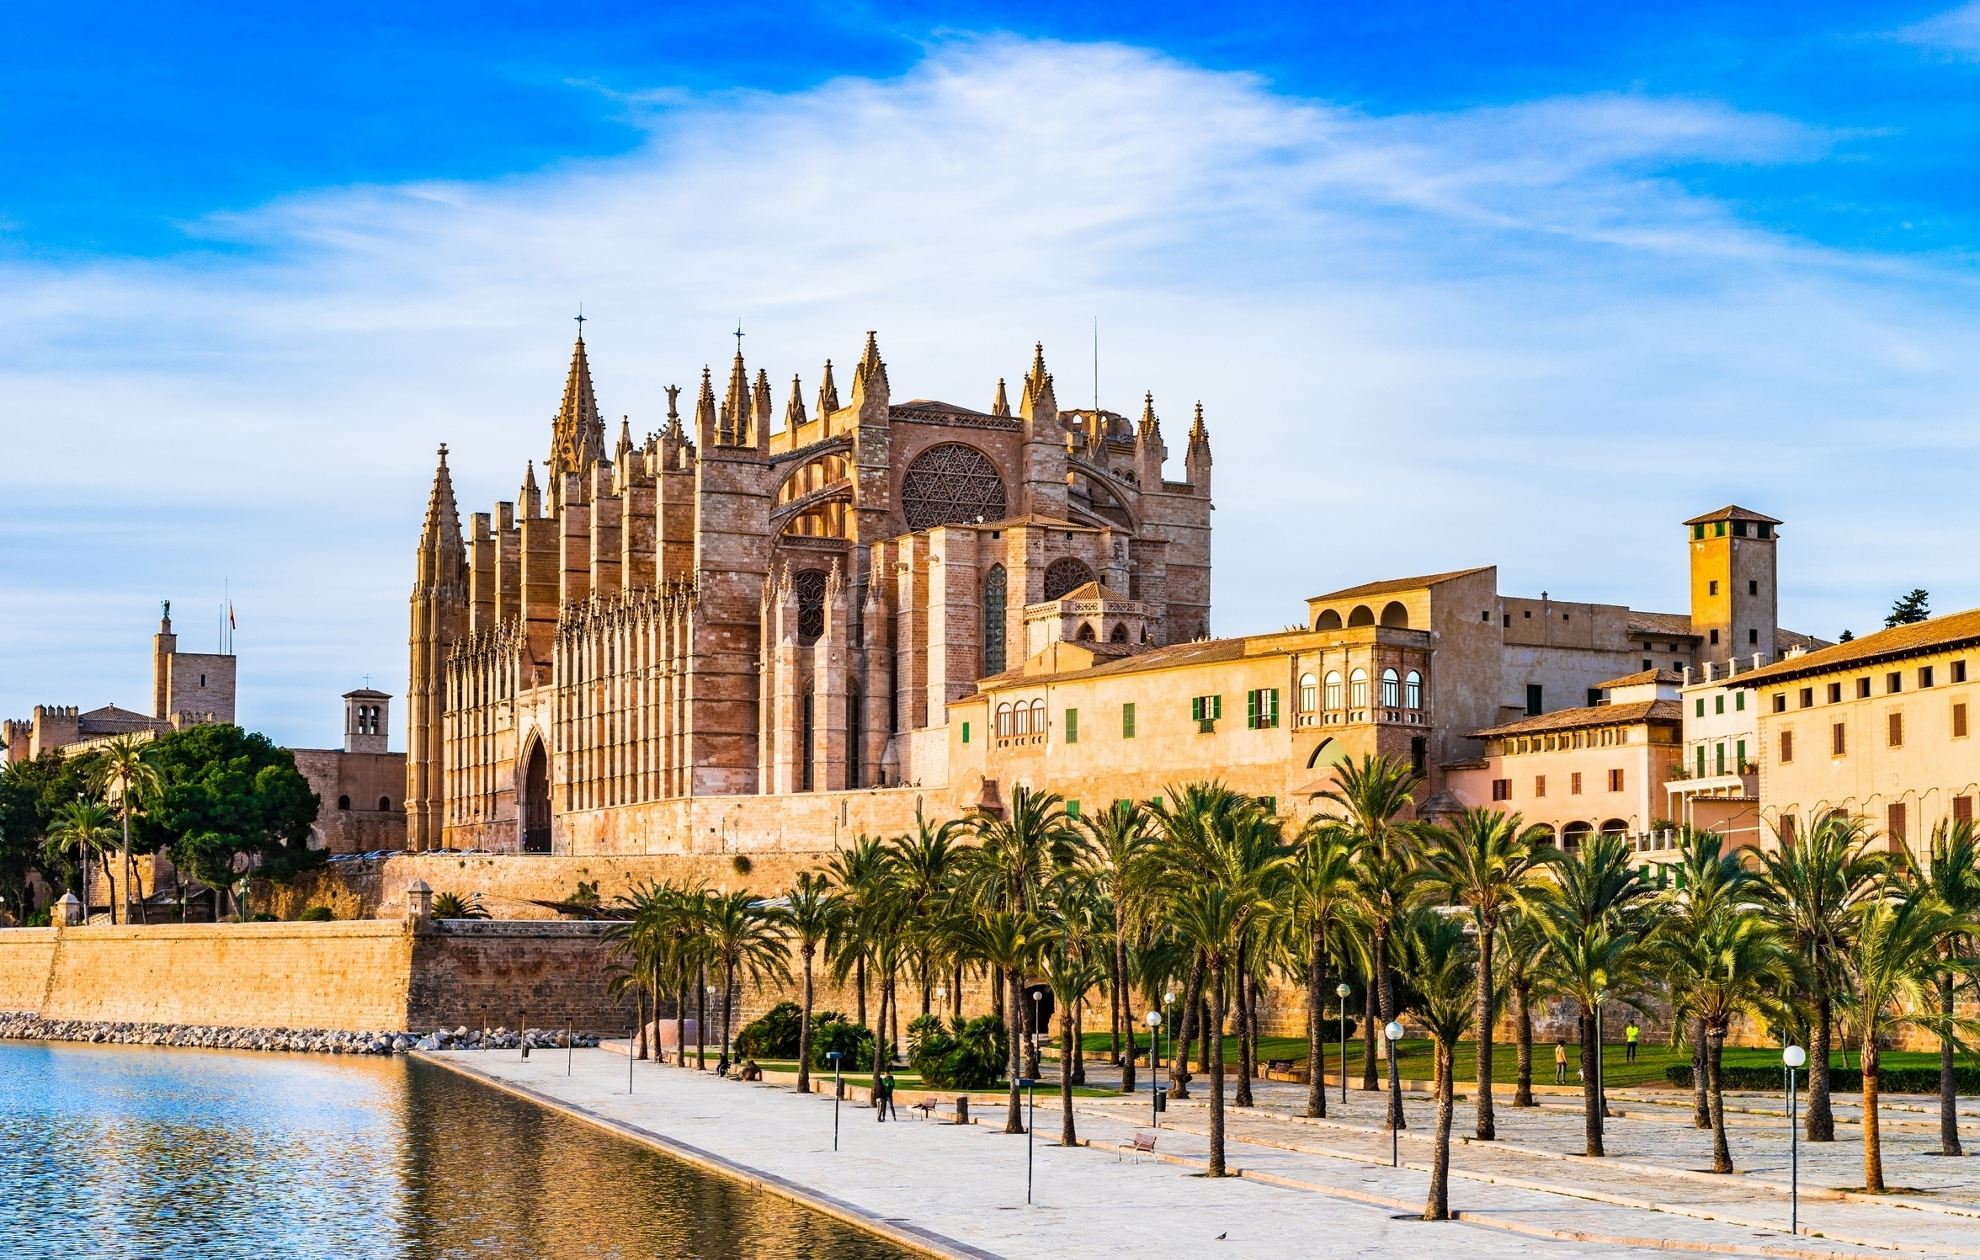 The city of Palma is an obligatory stop on your Mallorca walking holidays